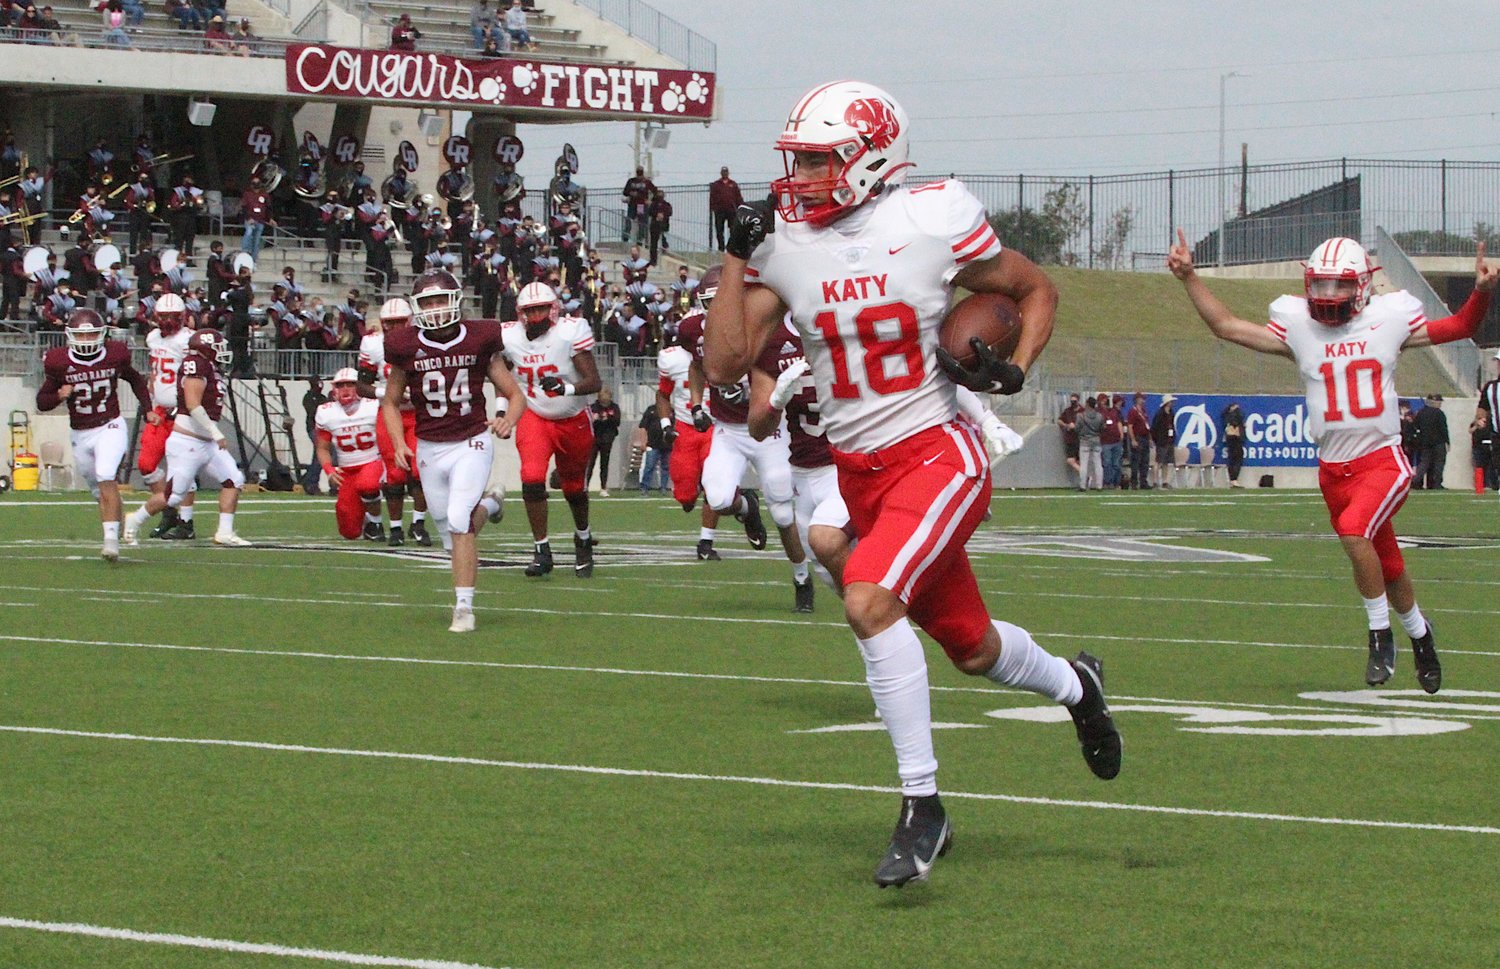 Katy High senior receiver Taylor Saulsberry is off to the races for a 46-yard first-half touchdown as quarterback Caleb Koger (10) celebrates behind him during the Tigers' win over Cinco Ranch on Oct. 24 at Legacy Stadium.